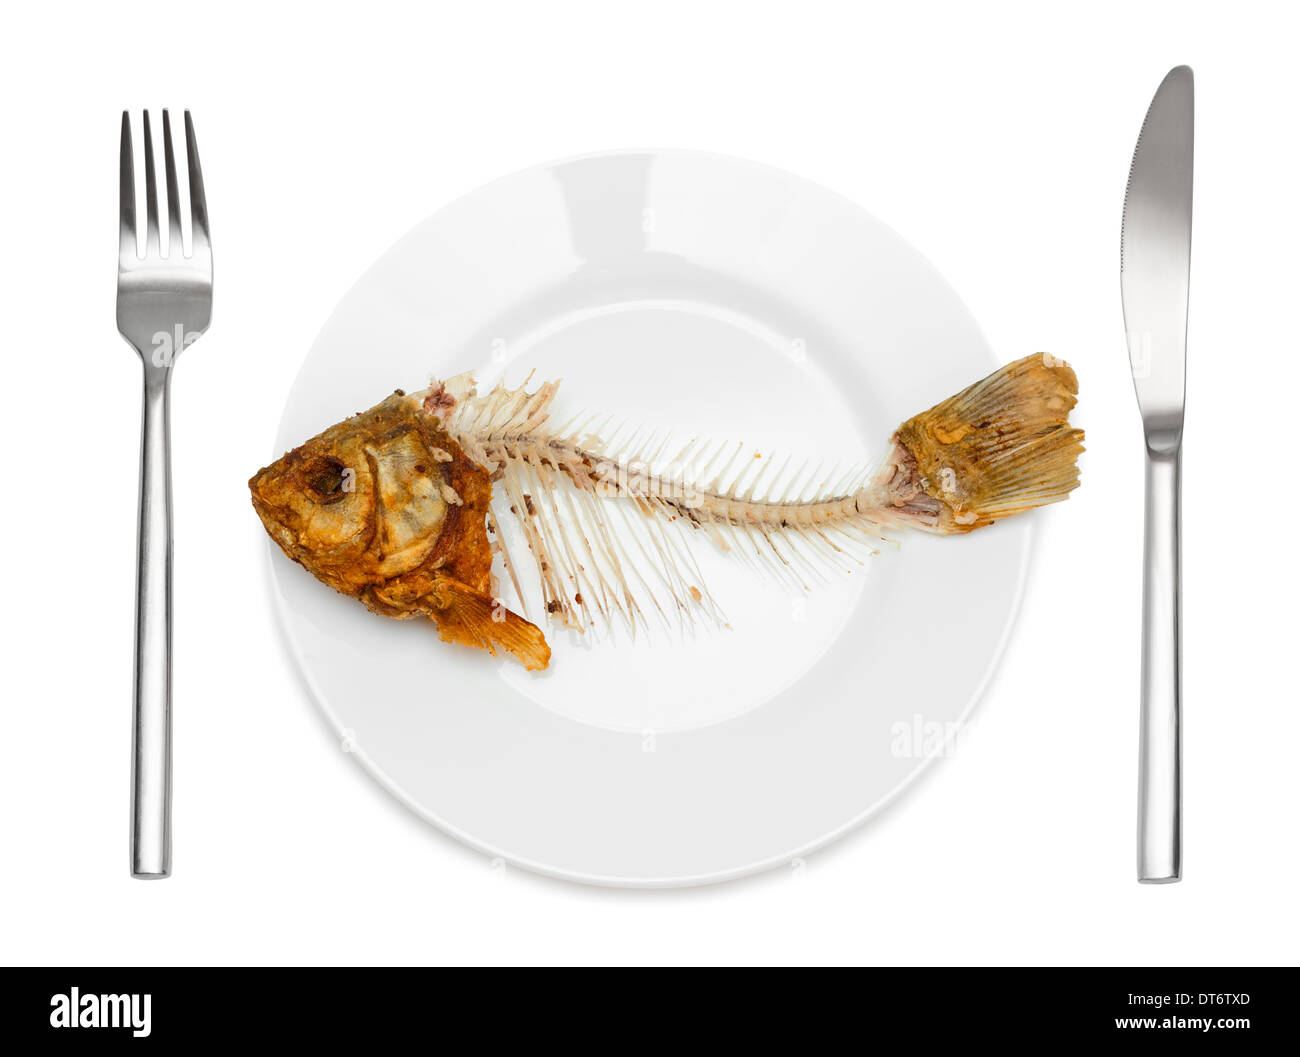 Fish skeleton on the plate - symbol for food shortage and misery. Isolated on white background. Stock Photo